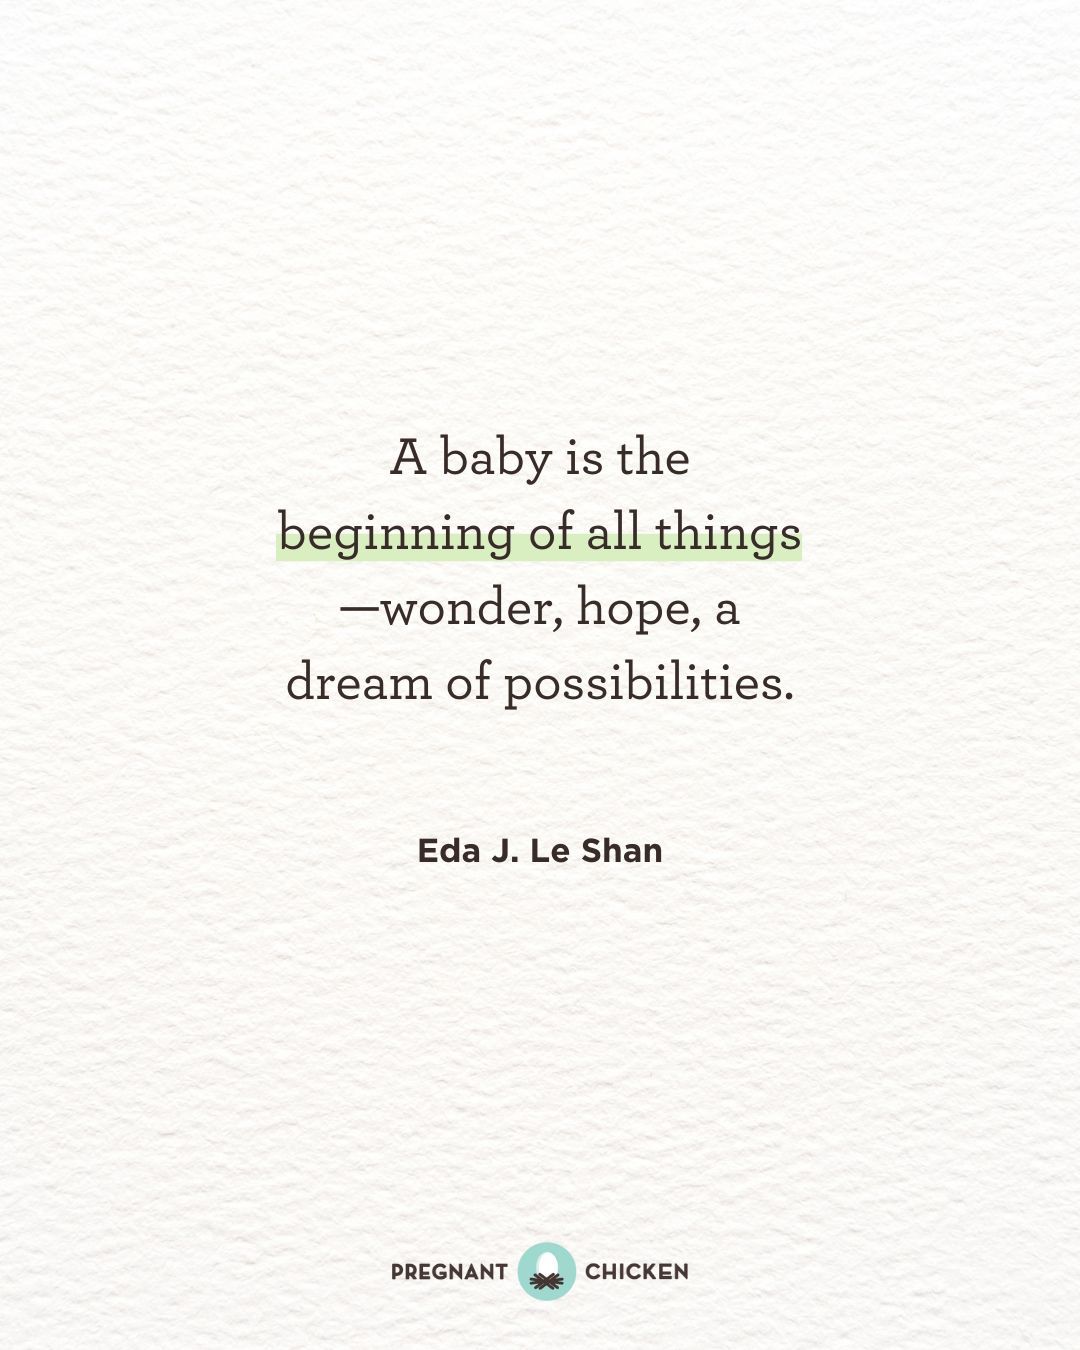 A baby is the beginning of all things—wonder, hope, a dream of possibilities.